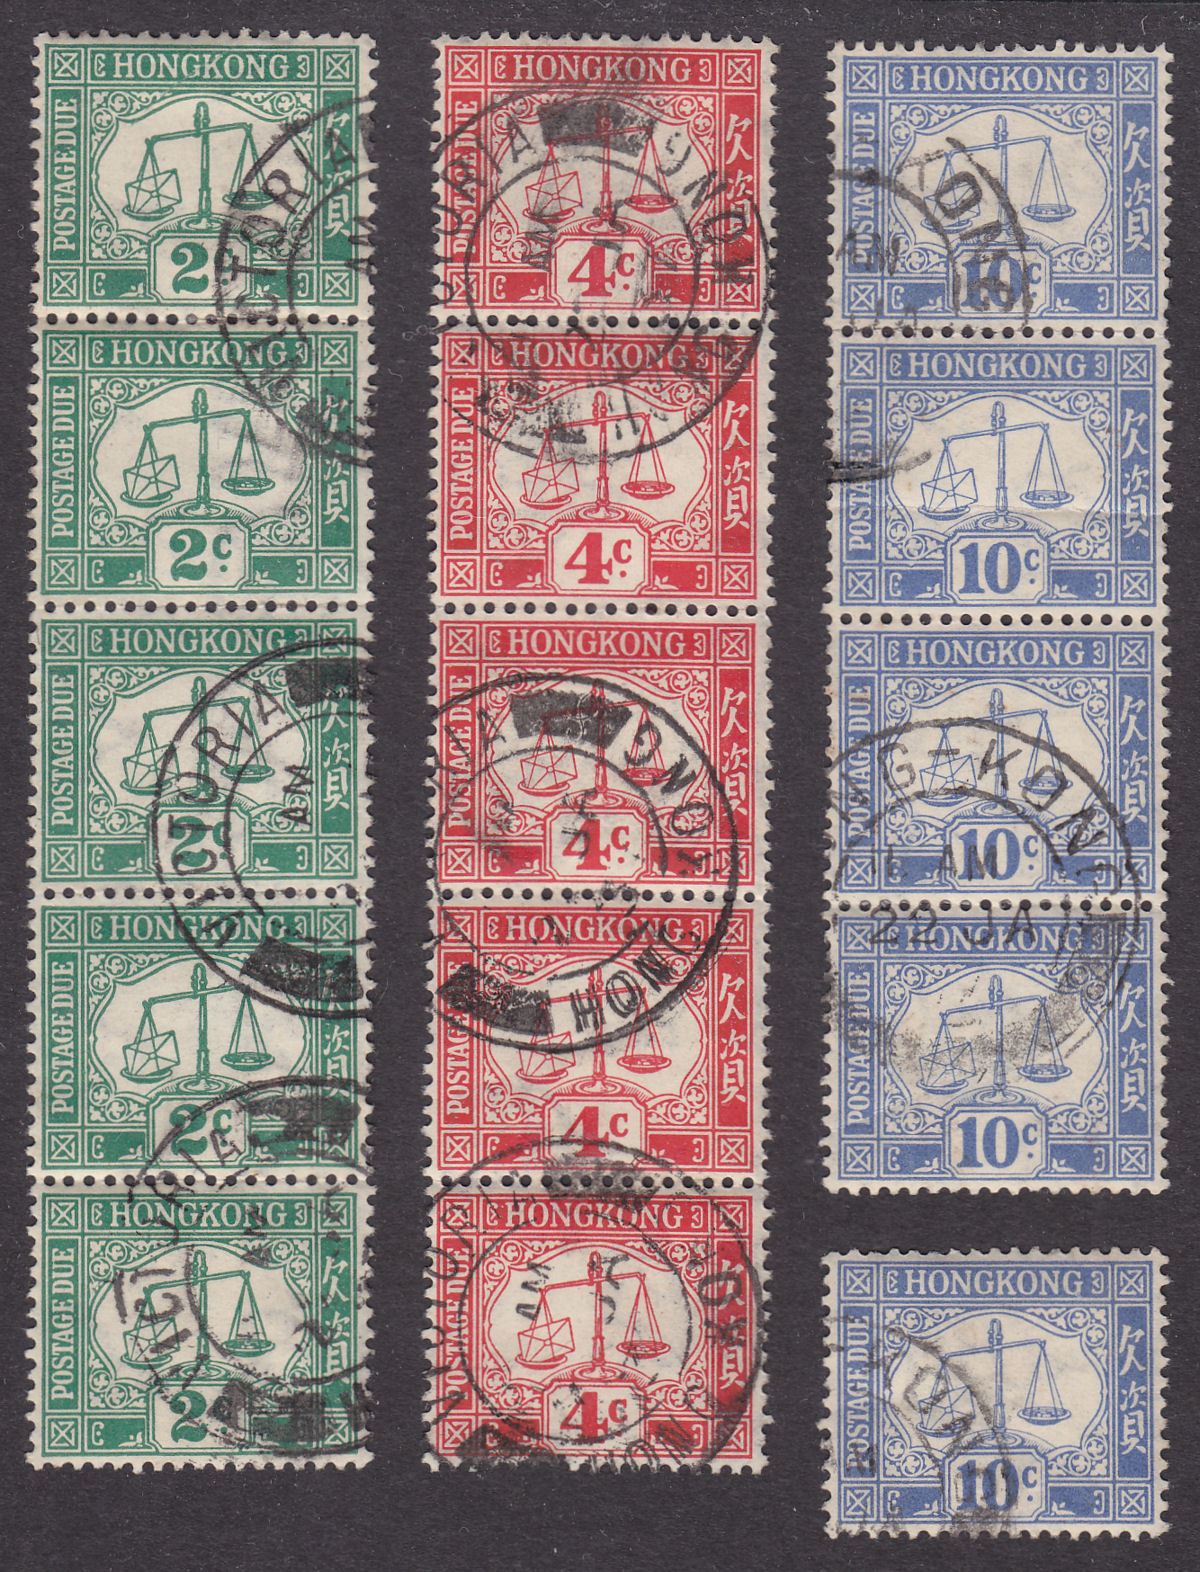 Hong Kong 1928-34 KGVI Postage Due 2c, 4c, 10c Strips Used SG D2a, D3a, D5a